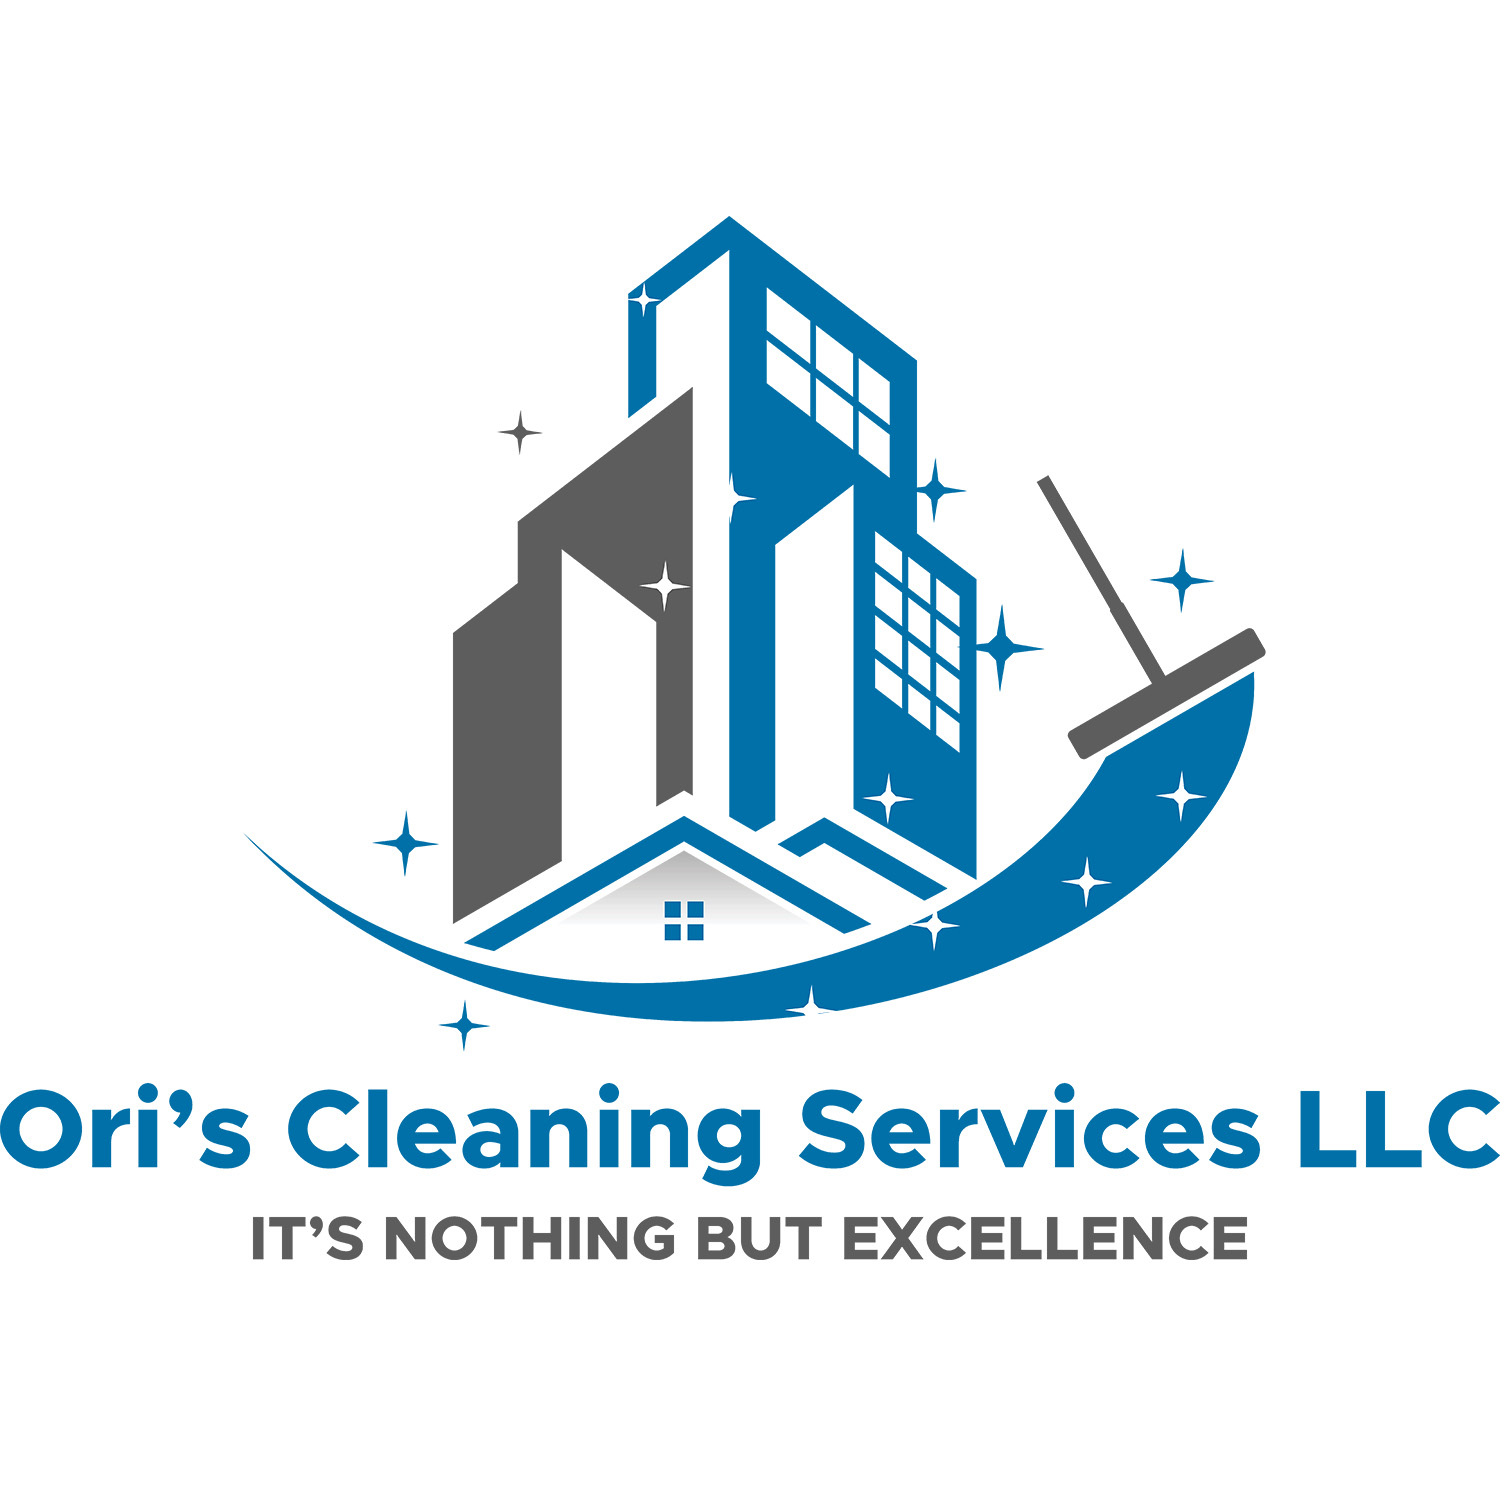 Ori’s Cleaning Services LLC